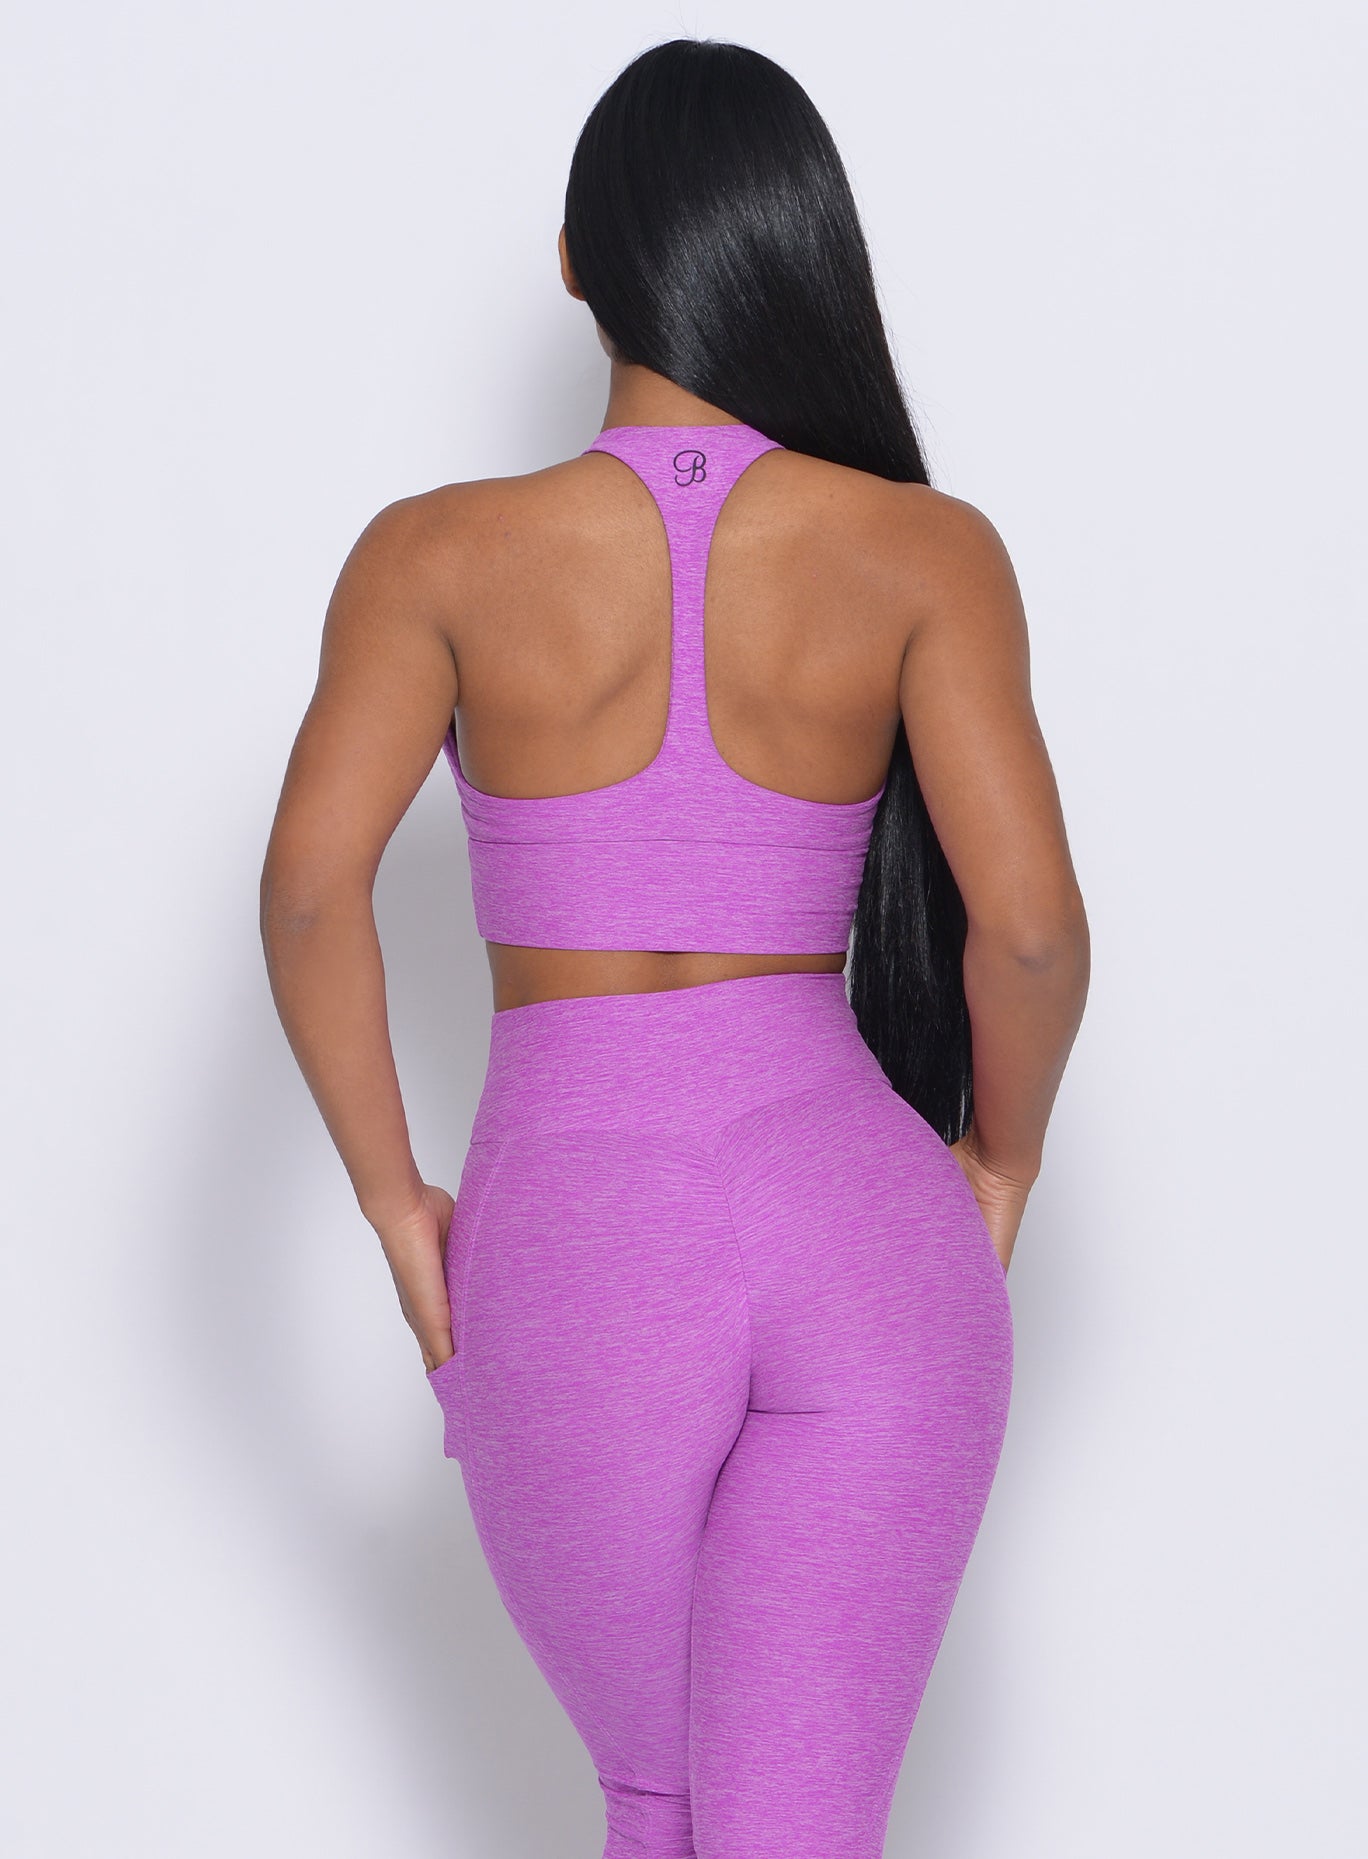 Back profile view of the model in our edgy longline bra in purple rain color and a matching leggings